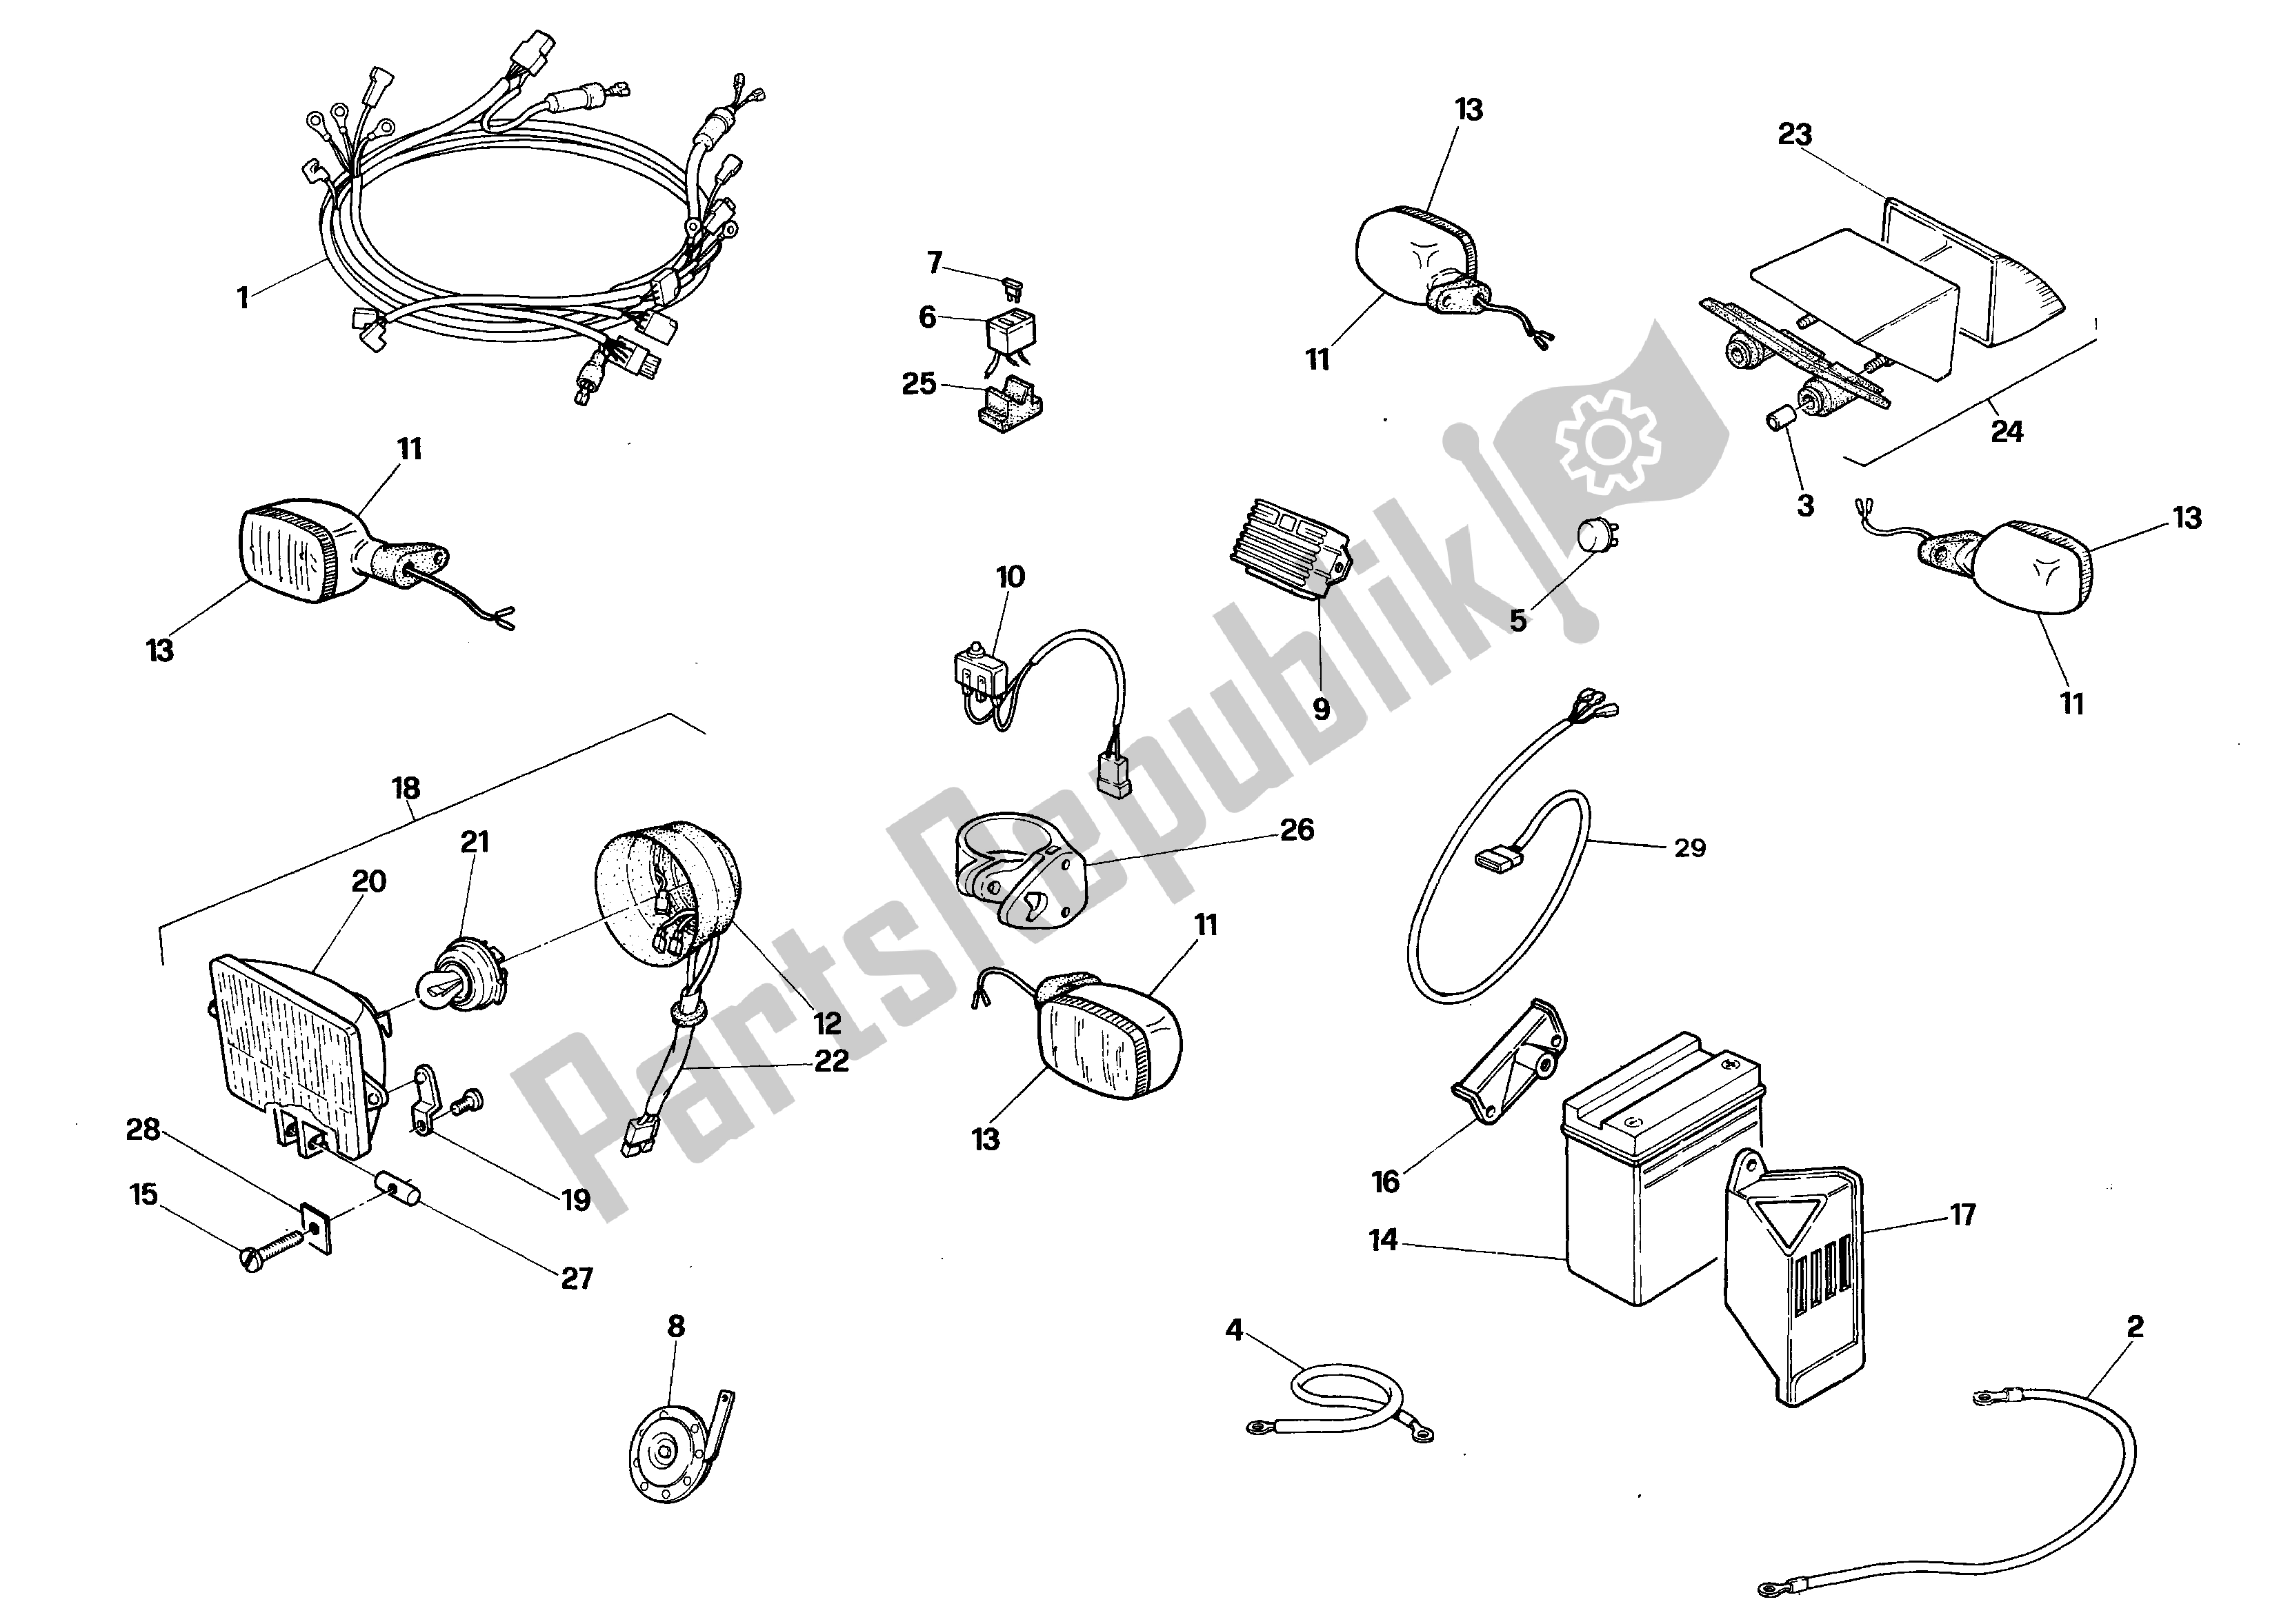 All parts for the Electrical System of the Aprilia RX 125 1994 - 1998